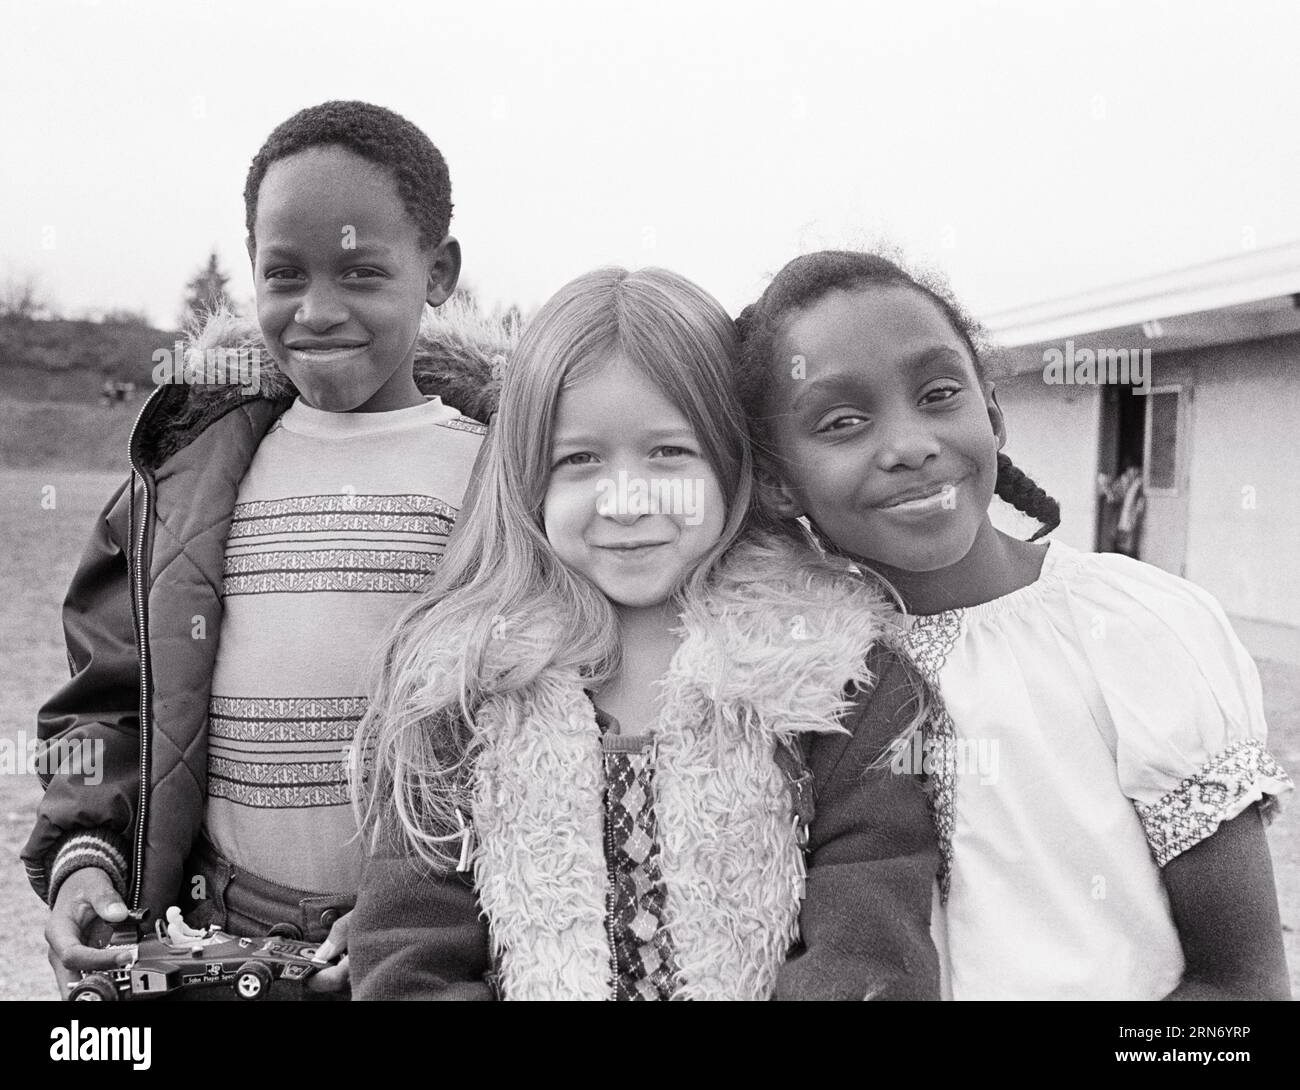 1970s CLASSMATES AFRICAN-AMERICAN BOY AND GIRL WITH A CAUCASIAN GIRL POSED TOGETHER SMILING LOOKING AT CAMERA - j14361 HAR001 HARS ELEMENTARY STYLE DIVERSE FRIEND DIFFERENT PLEASED JOY LIFESTYLE FEMALES WINNING COPY SPACE FRIENDSHIP HALF-LENGTH MALES CONFIDENCE B&W EYE CONTACT SCHOOLS GRADE HAPPINESS CHEERFUL AFRICAN-AMERICANS AFRICAN-AMERICAN AND BLACK ETHNICITY PRIDE PRIMARY SMILES CONNECTION FRIENDLY JOYFUL VARIOUS PLEASANT VARIED AGREEABLE CHARMING GRADE SCHOOL GROWTH JUVENILES LOVABLE PLEASING POSED PRE-TEEN GIRL TOGETHERNESS ADORABLE APPEALING BLACK AND WHITE CAUCASIAN ETHNICITY Stock Photo